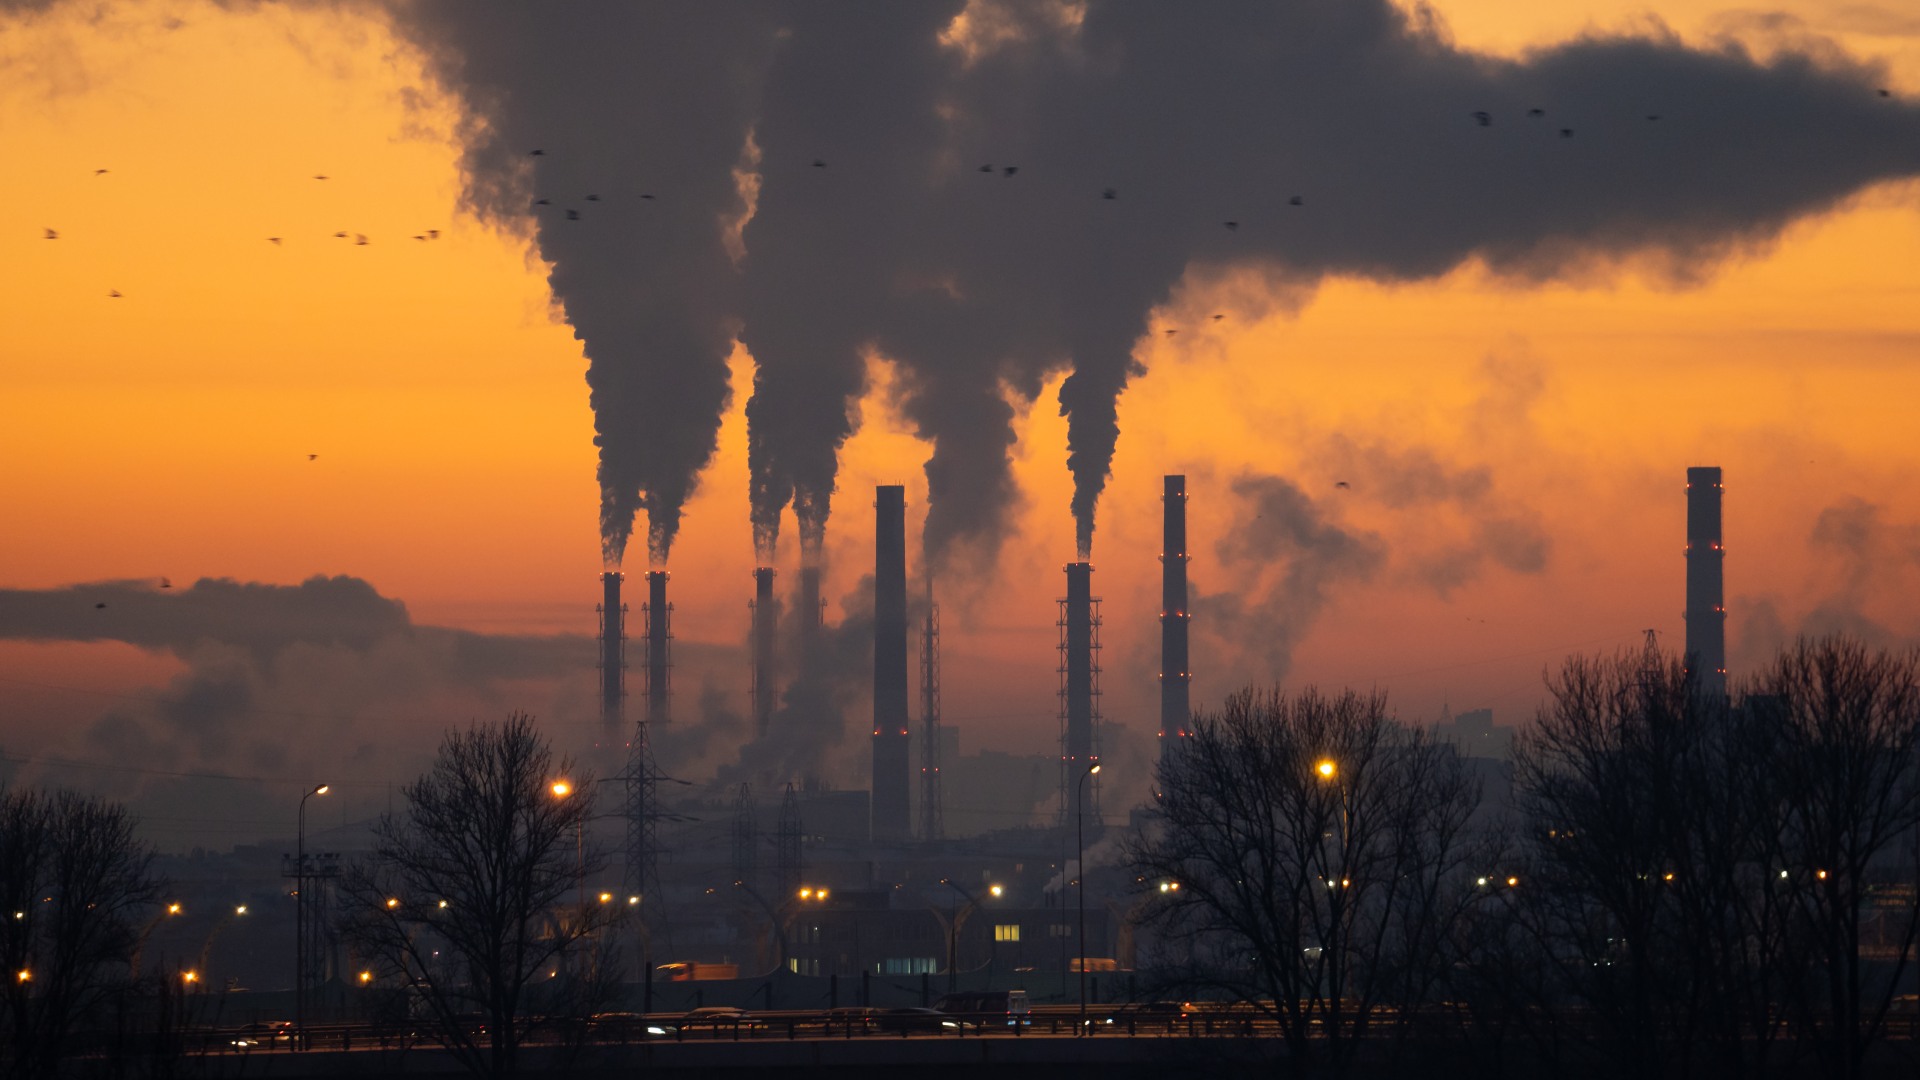 Air Pollution in Cities – Sources, Effects, & Solutions